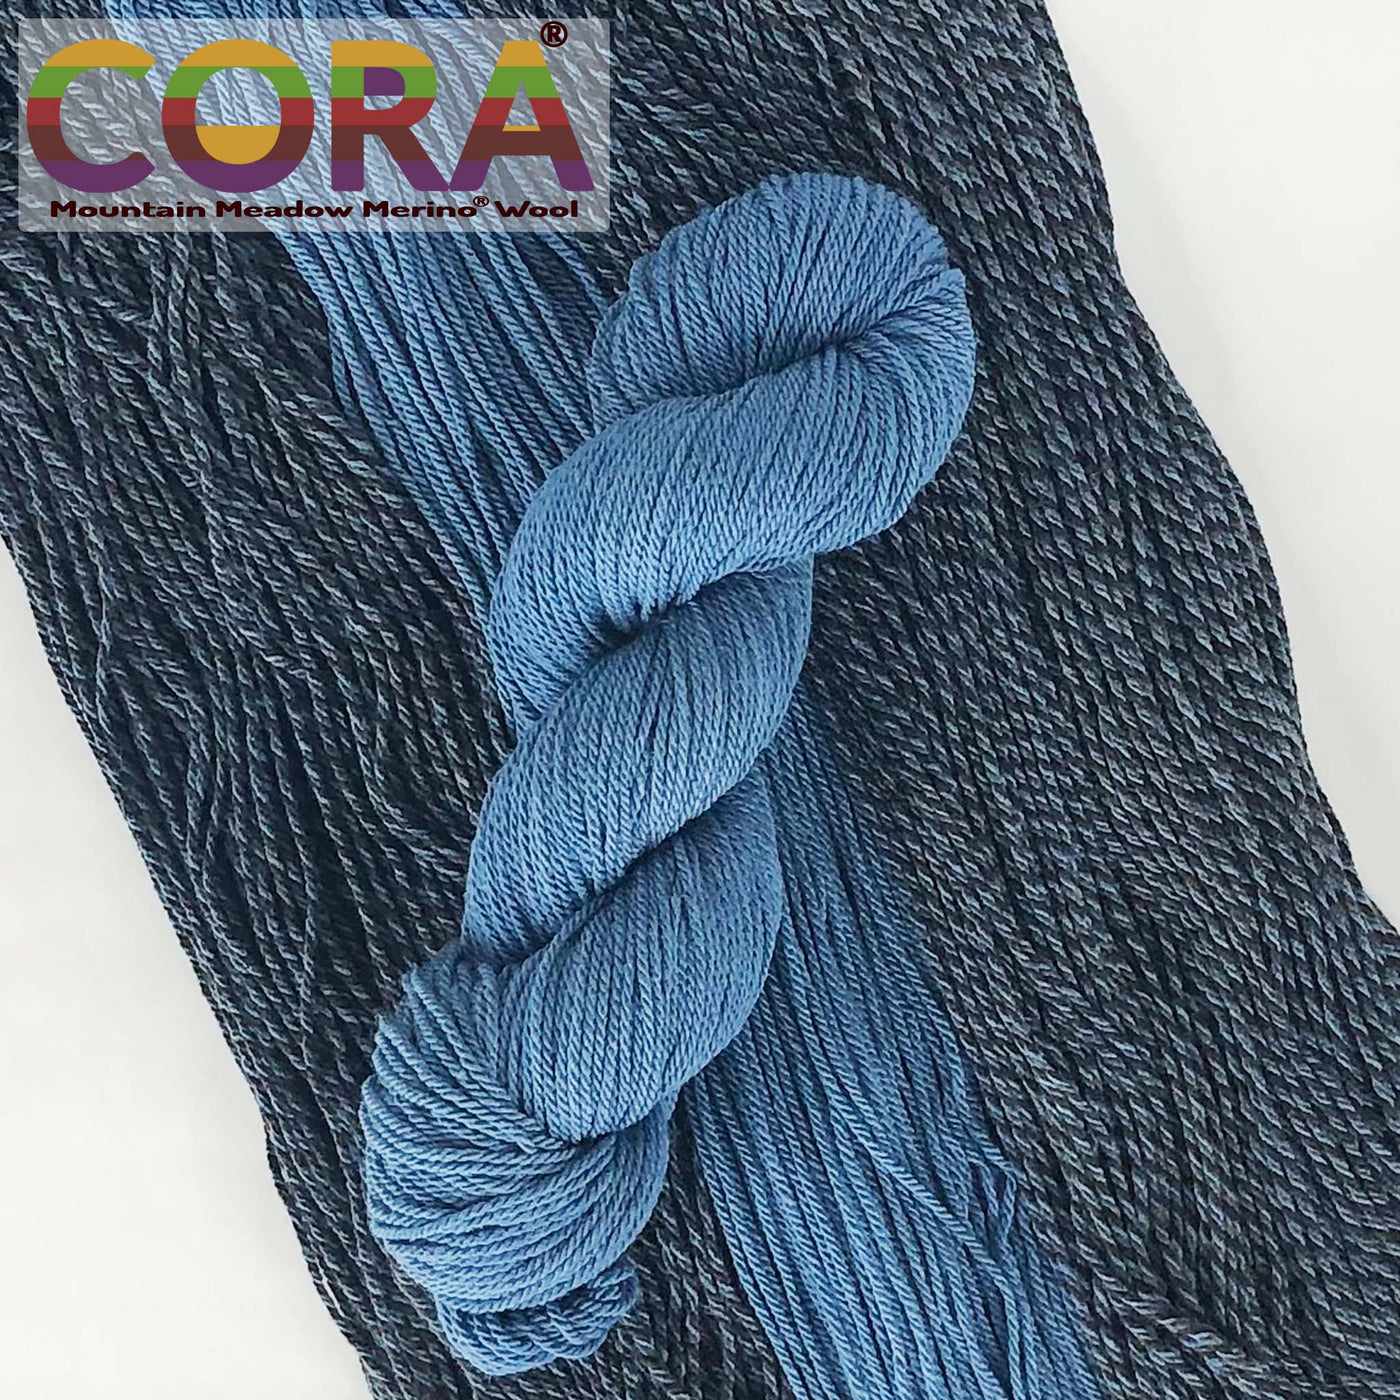 Cora 3ply Worsted Weight Yarn